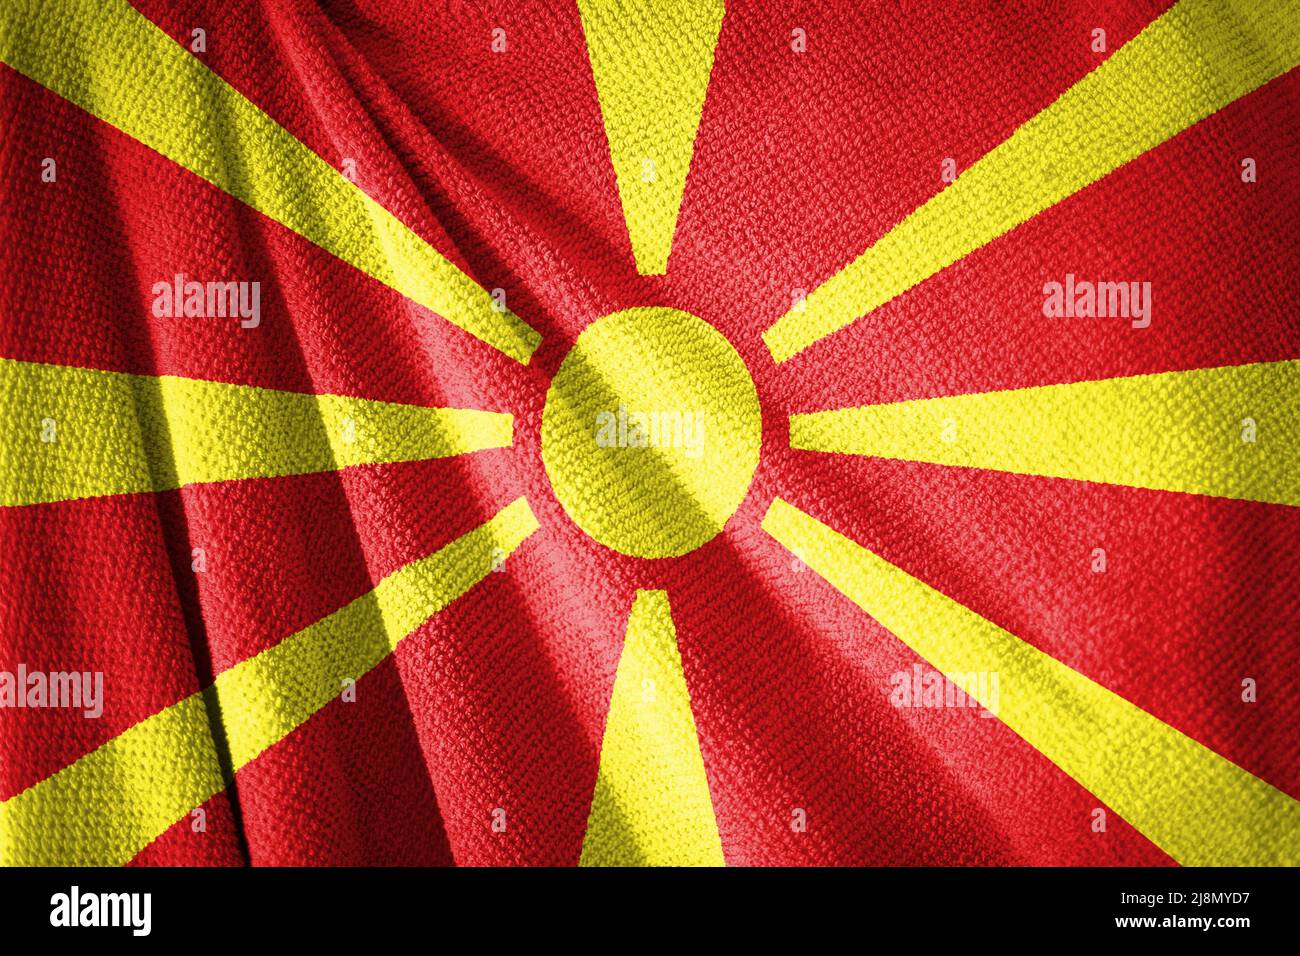 Northern Macedonia flag on towel surface illustration with, country symbol Stock Photo